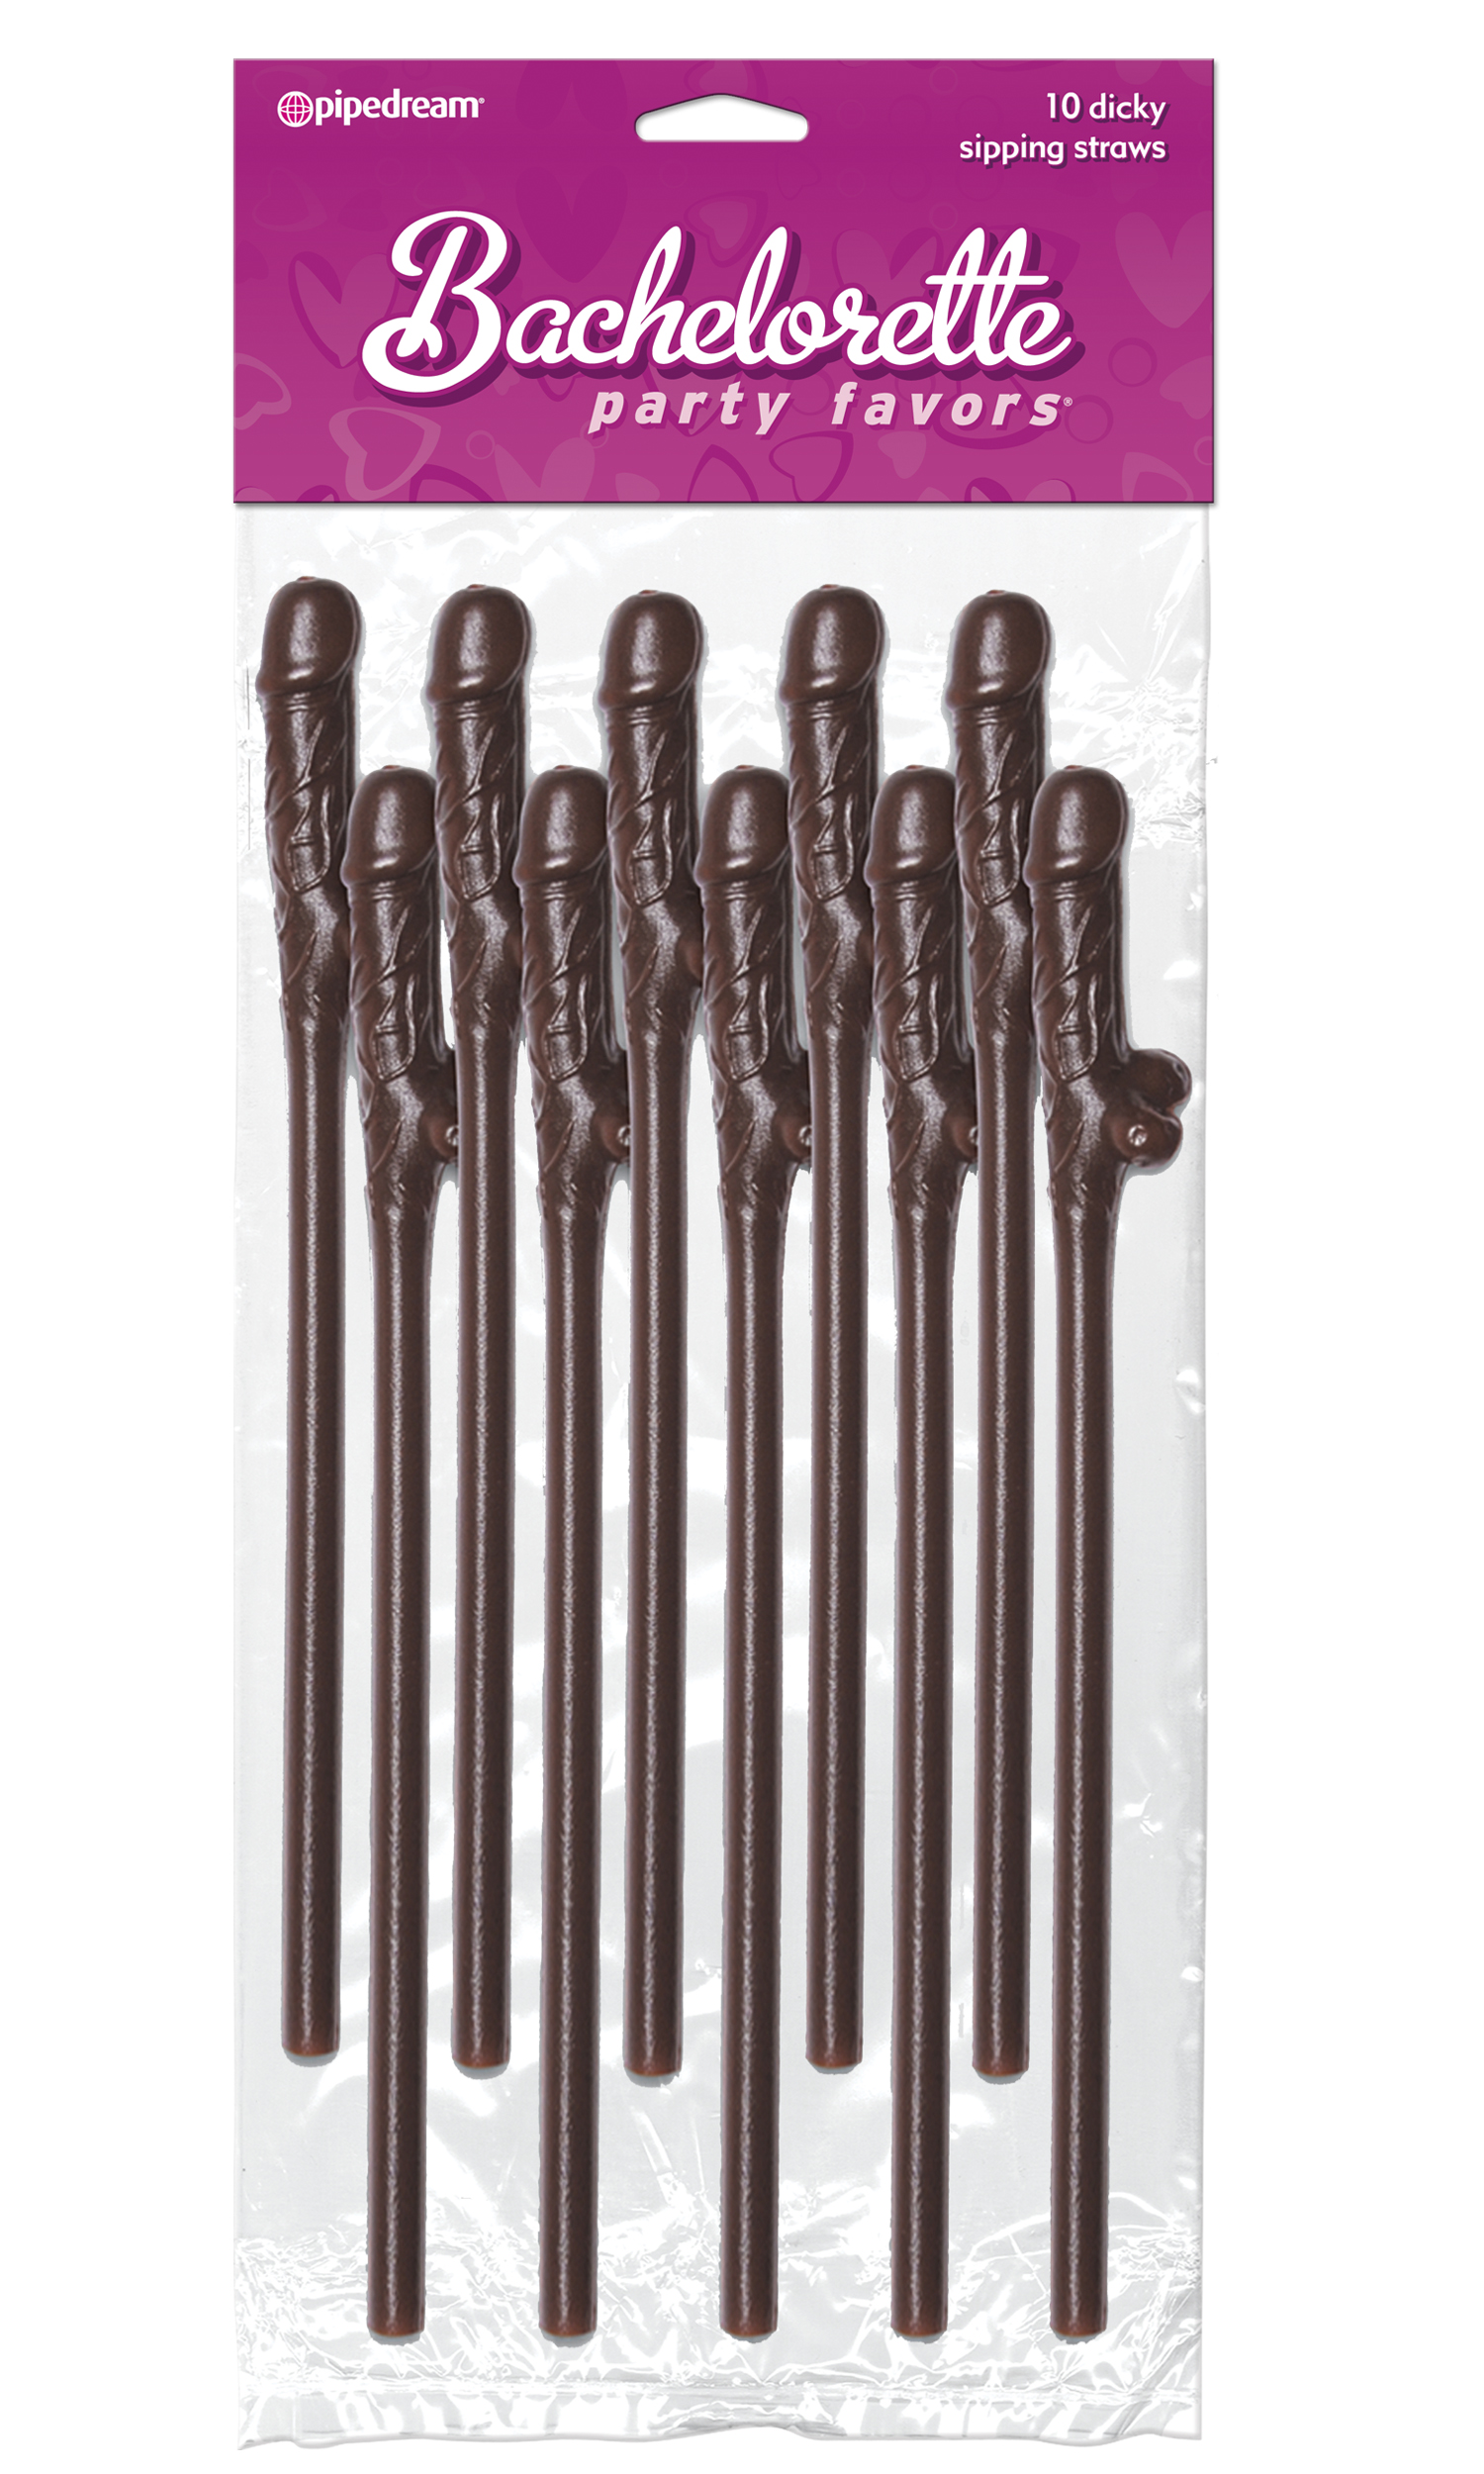 BACHELORETTE CHOCOLATE DICKY SIPPING STRAWS 10/PK  